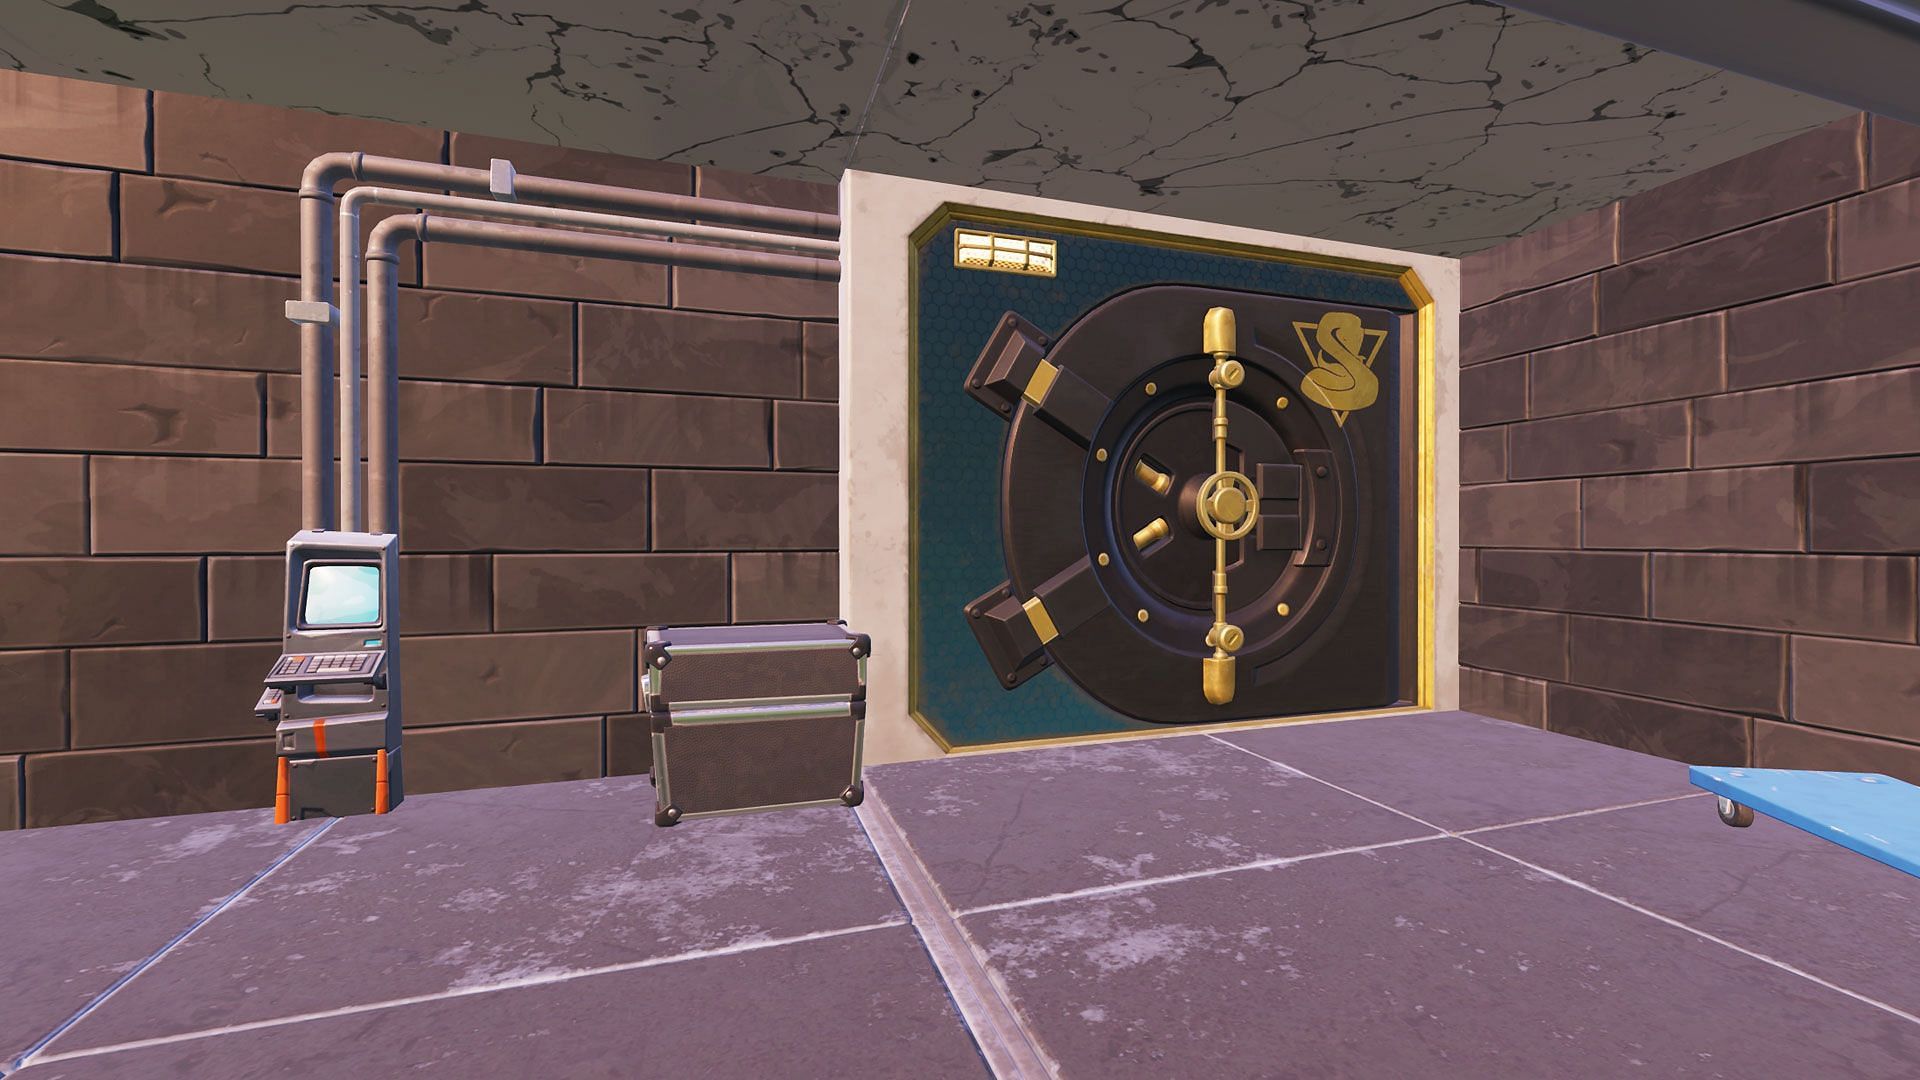 Opening Fortnite vaults during the Most Wanted event can be very challenging (Image via Epic Games)